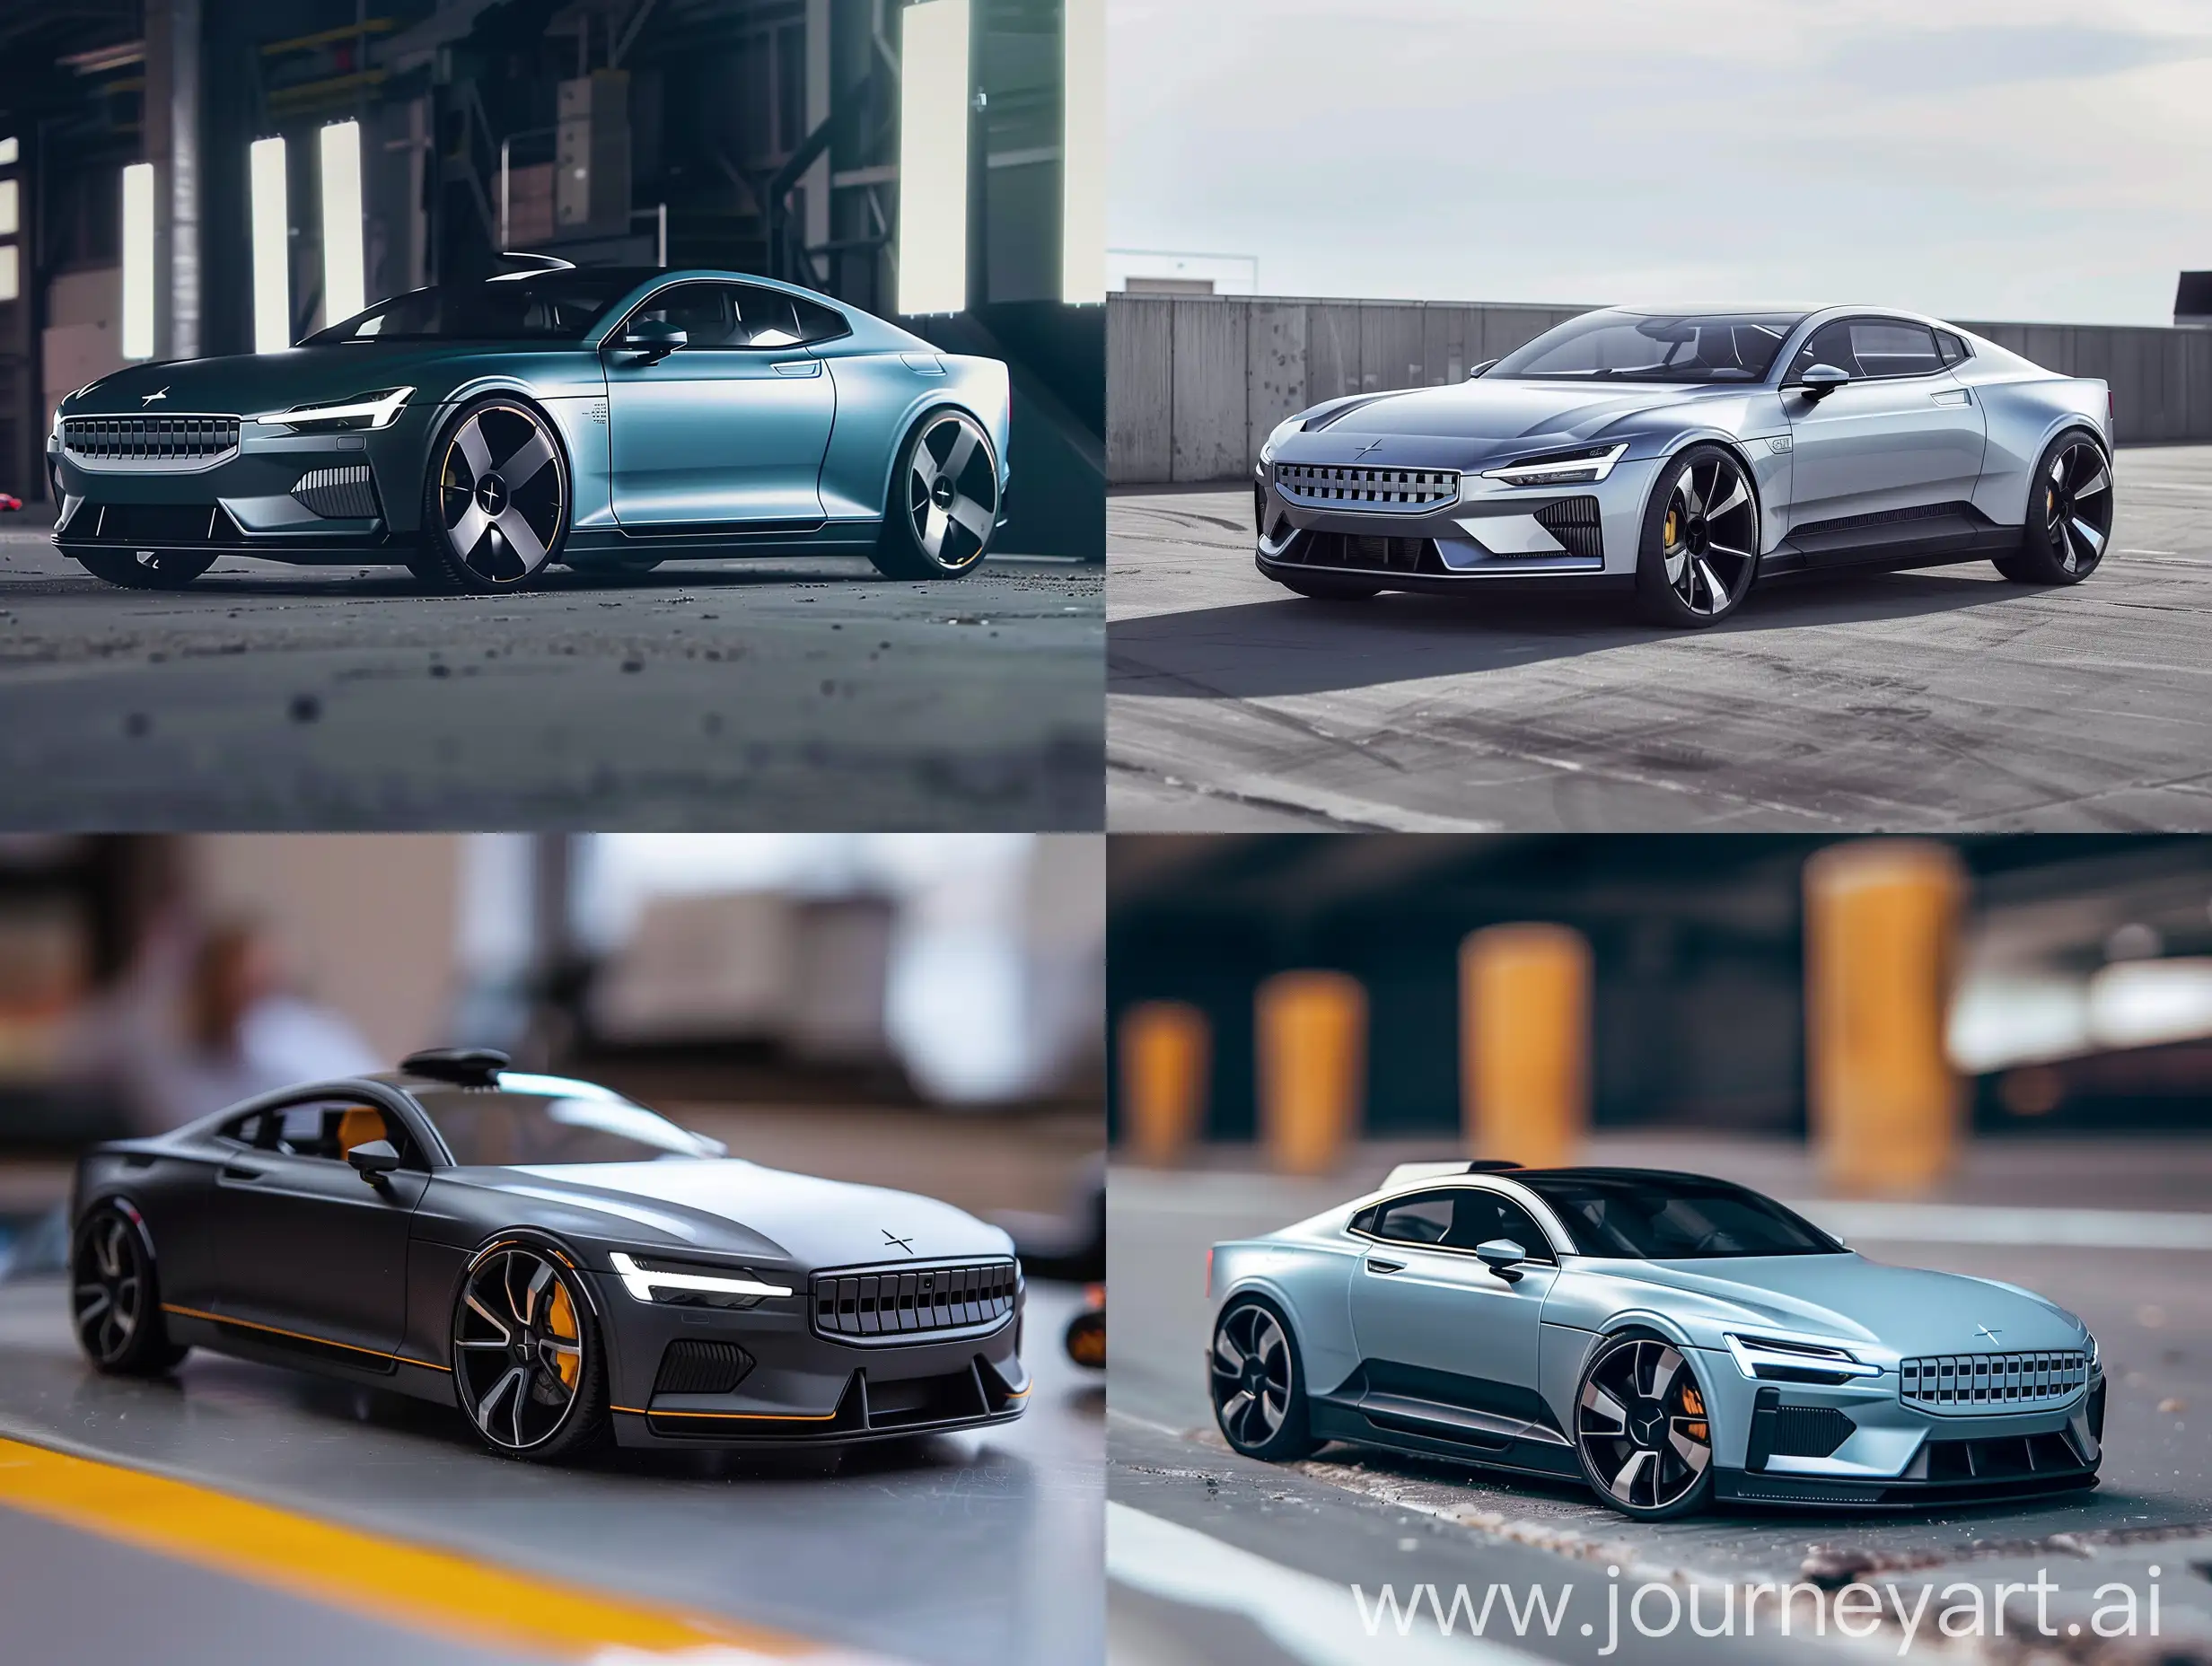 polestar's colaboration with hotwheels to design an hyper car 